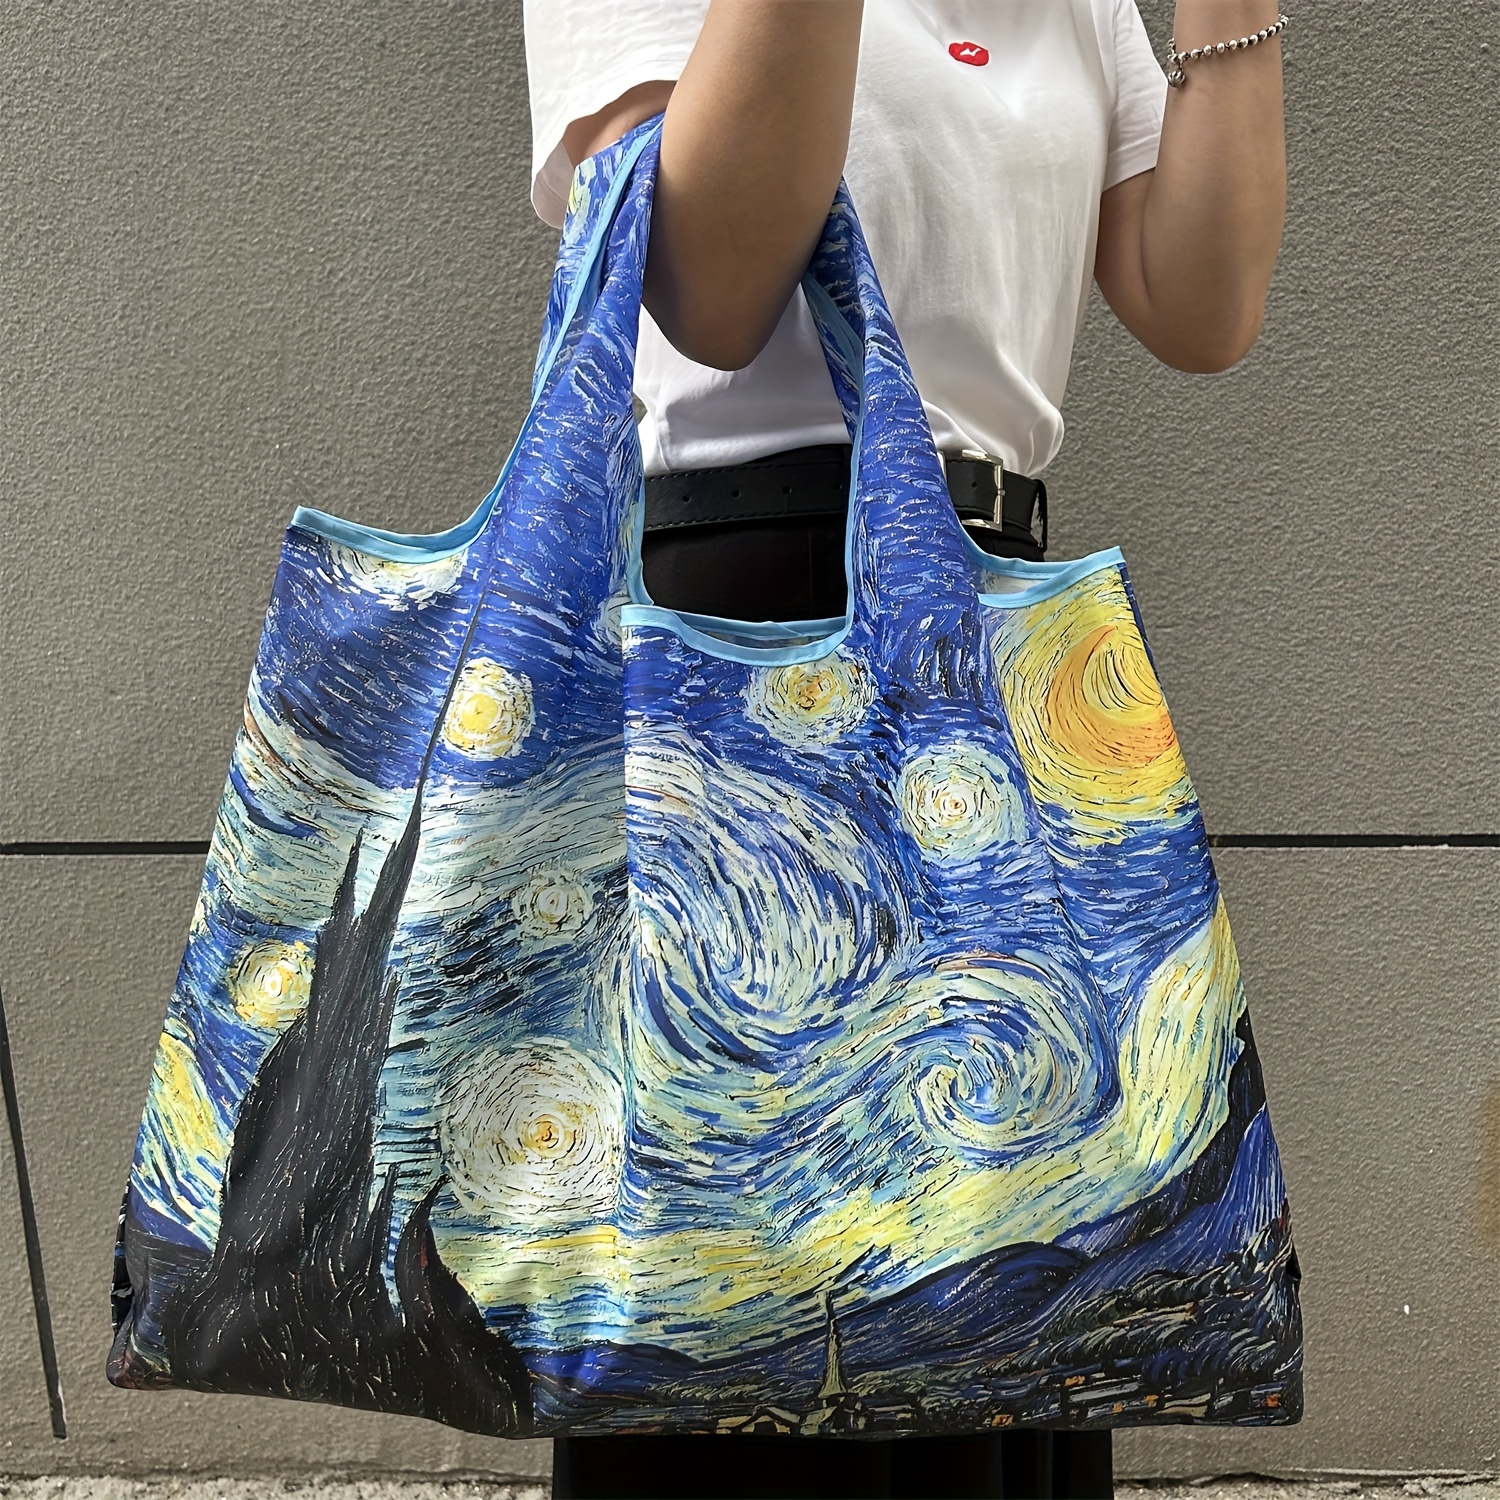 

Large Capacity Tote Bag, Lightweight And Reusable Shopping Bag, Foldable Nylon Bag With Starry Night Oil Painting Design, Portable Handled Carry Bag